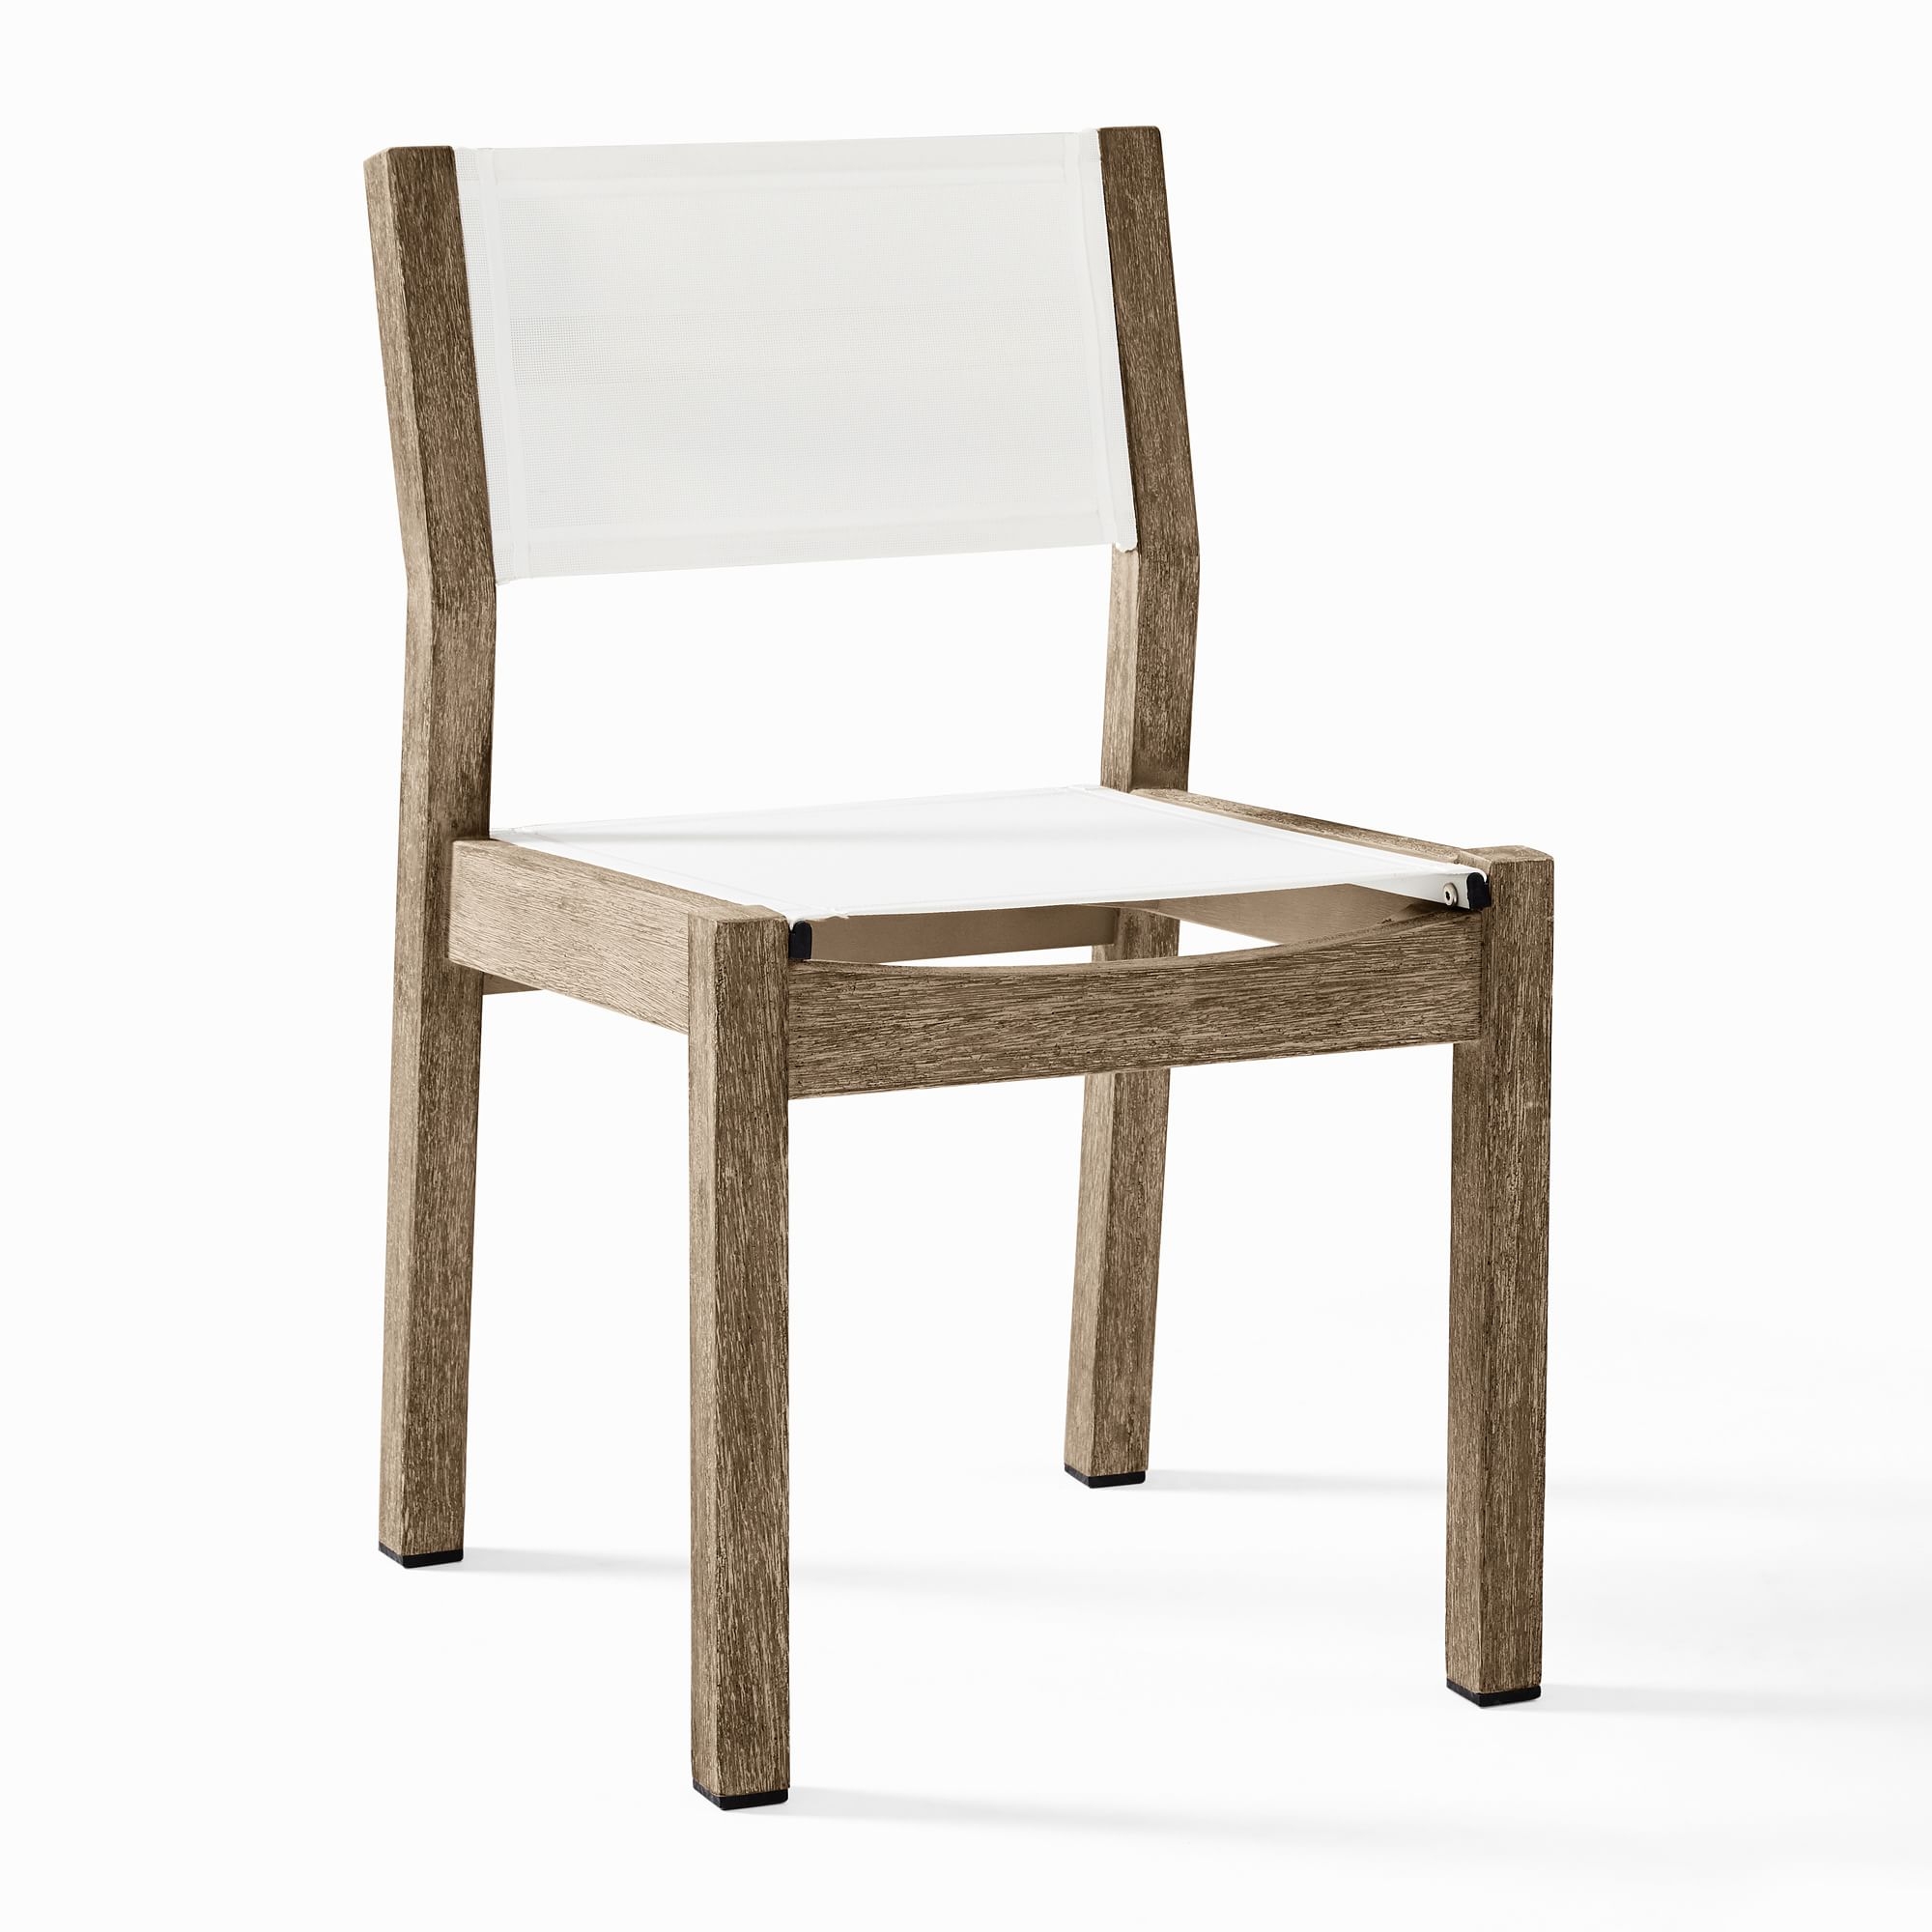 Portside Outdoor Textaline Dining Chairs, Driftwood, Set of 2 - Image 2